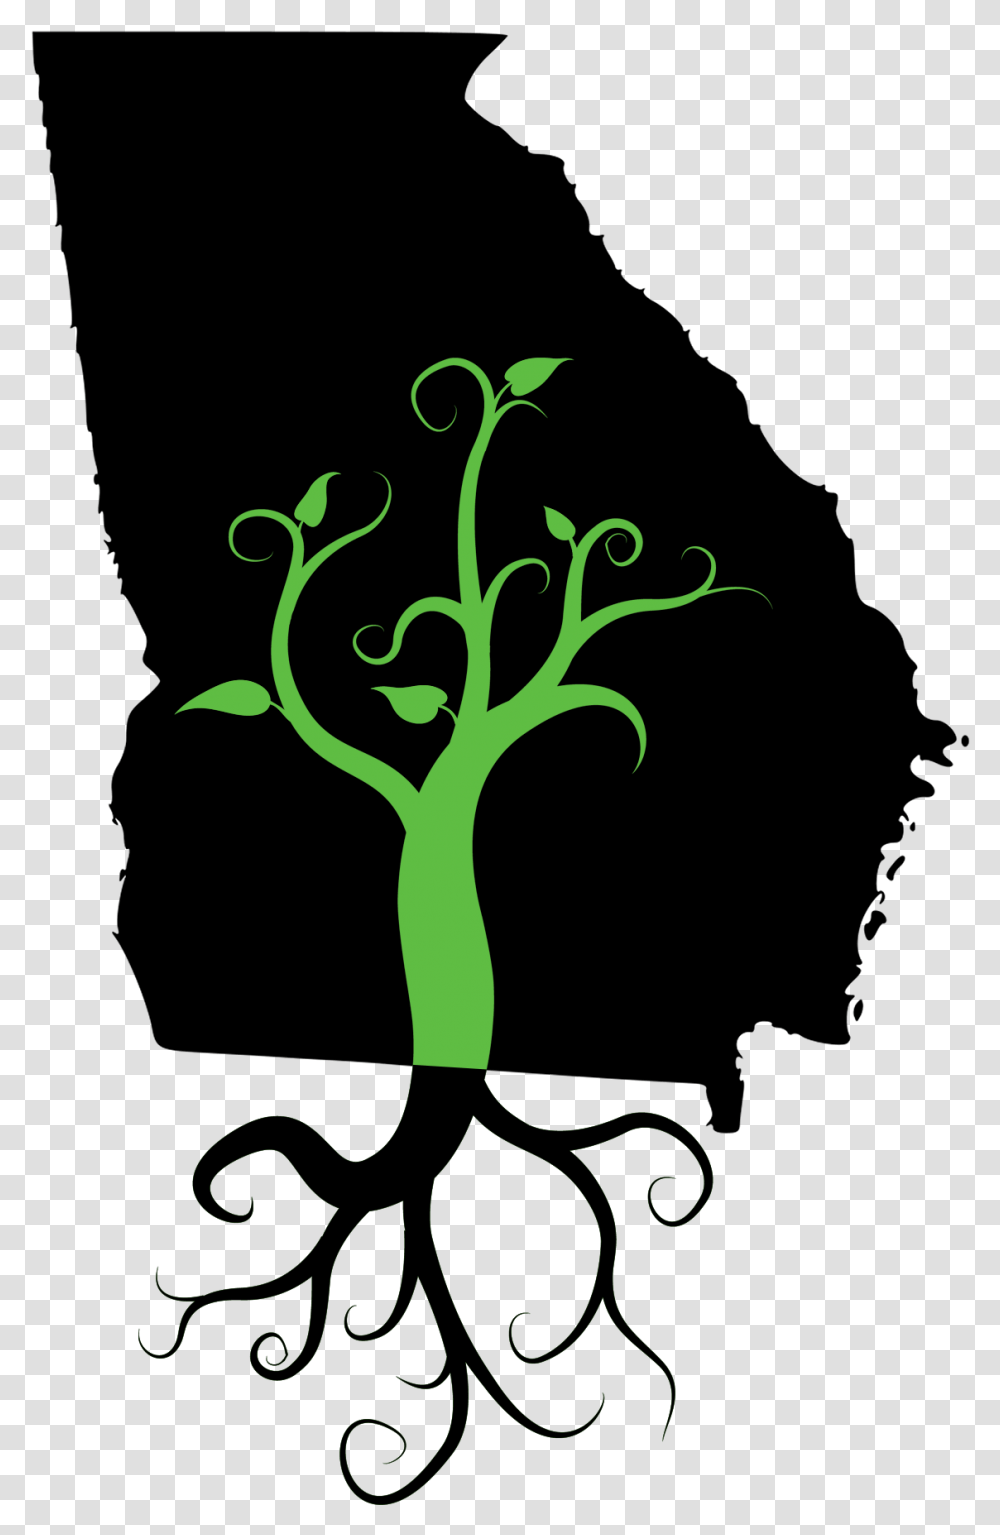 Georgia State Outline Black Cartoons State Of Georgia, Plant, Tree, Sprout, Green Transparent Png